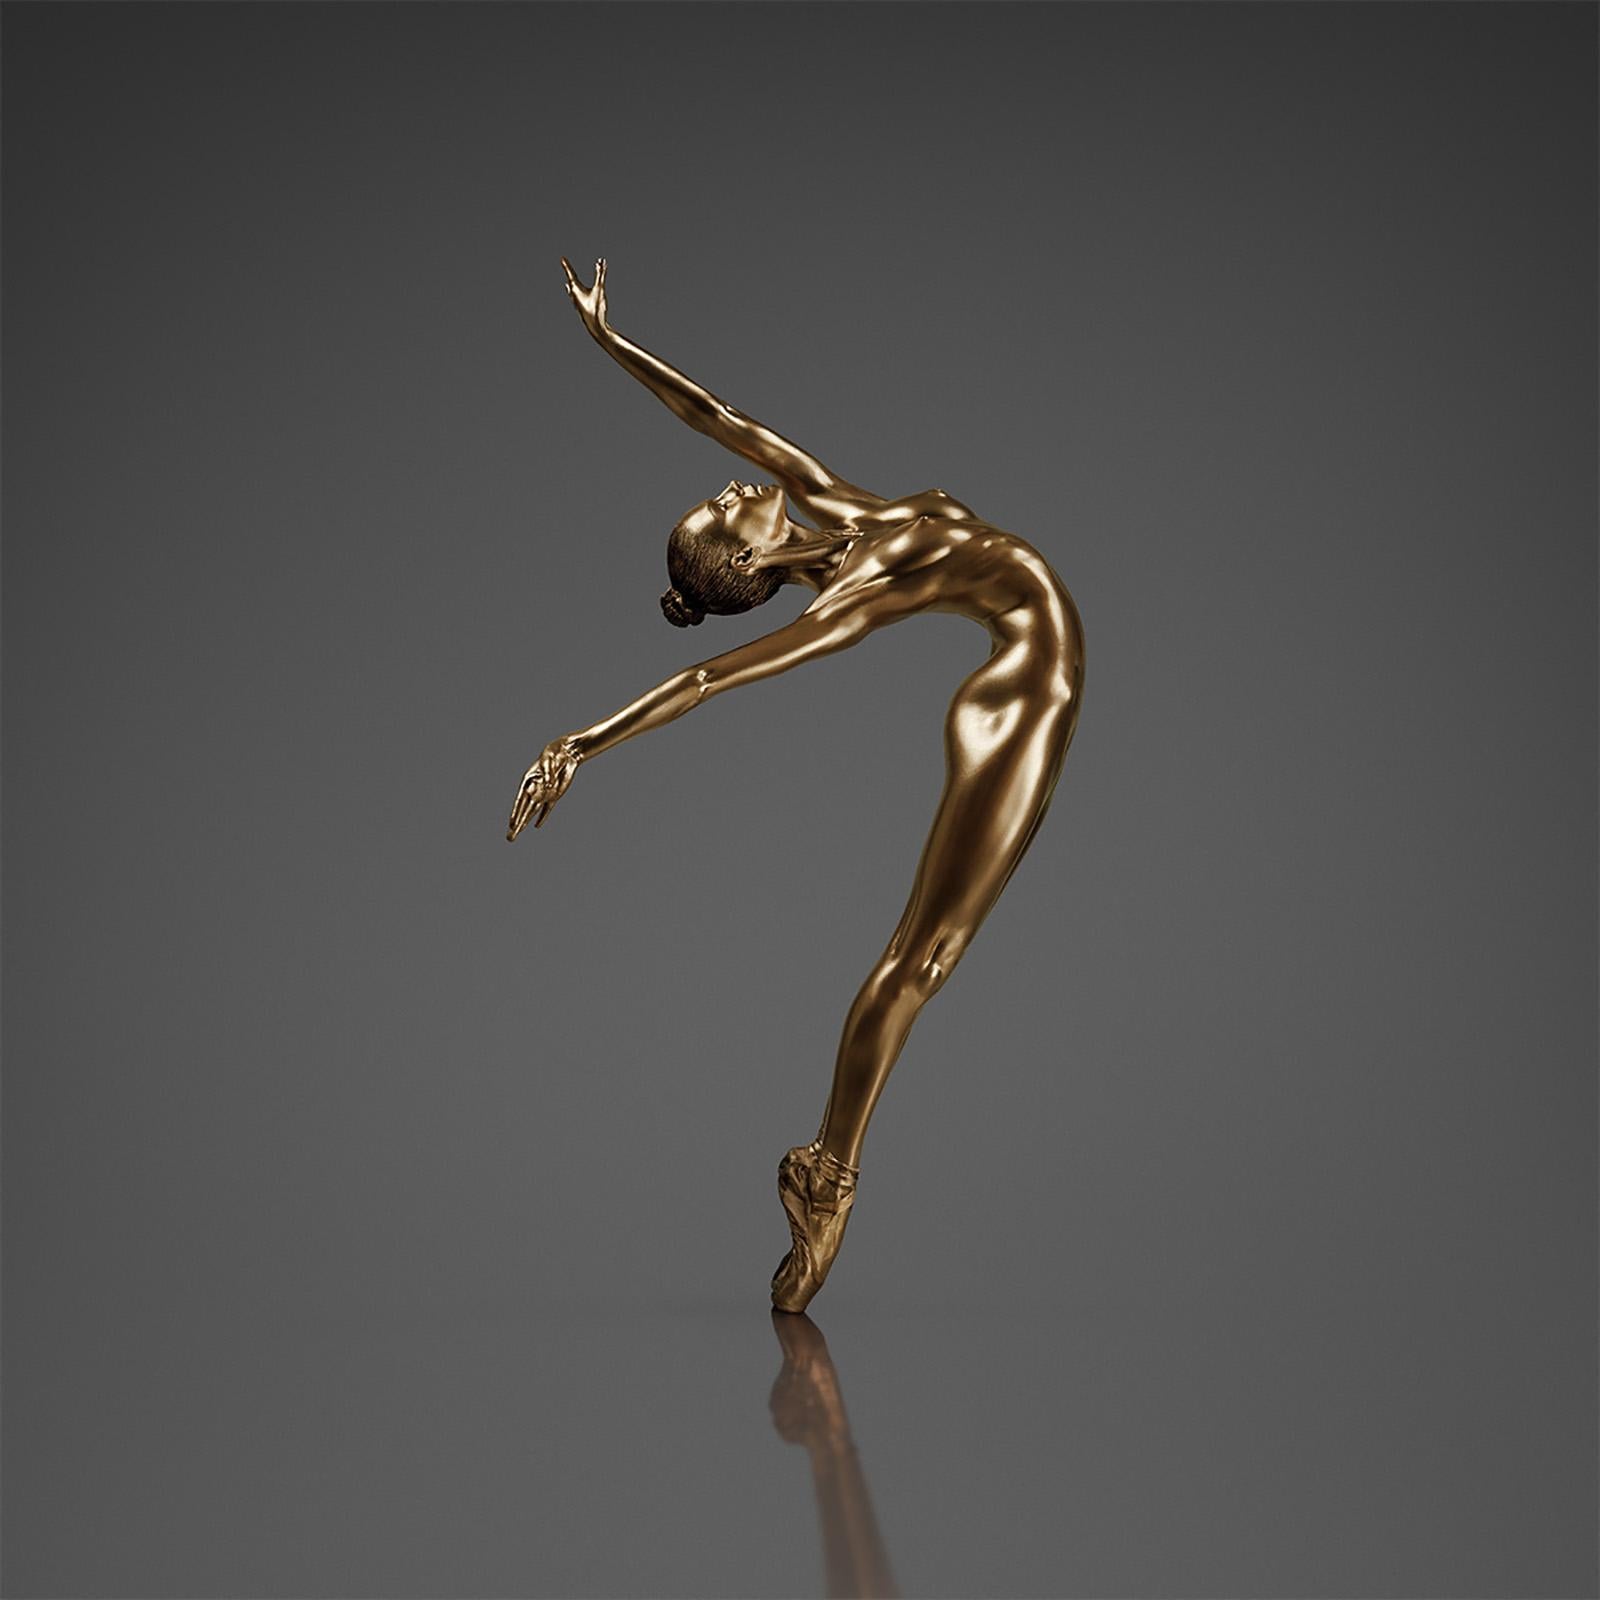 No title (No 03) 
Photography 
Edition of 25 (32 x 32 inch) by Yevgeniy Repiashenko
Year photo was taken: 2018

This picture is a part of Spirit series.
The picture shows the frozen movement of the dancer. 
Gold body make-up is put on the dancer's